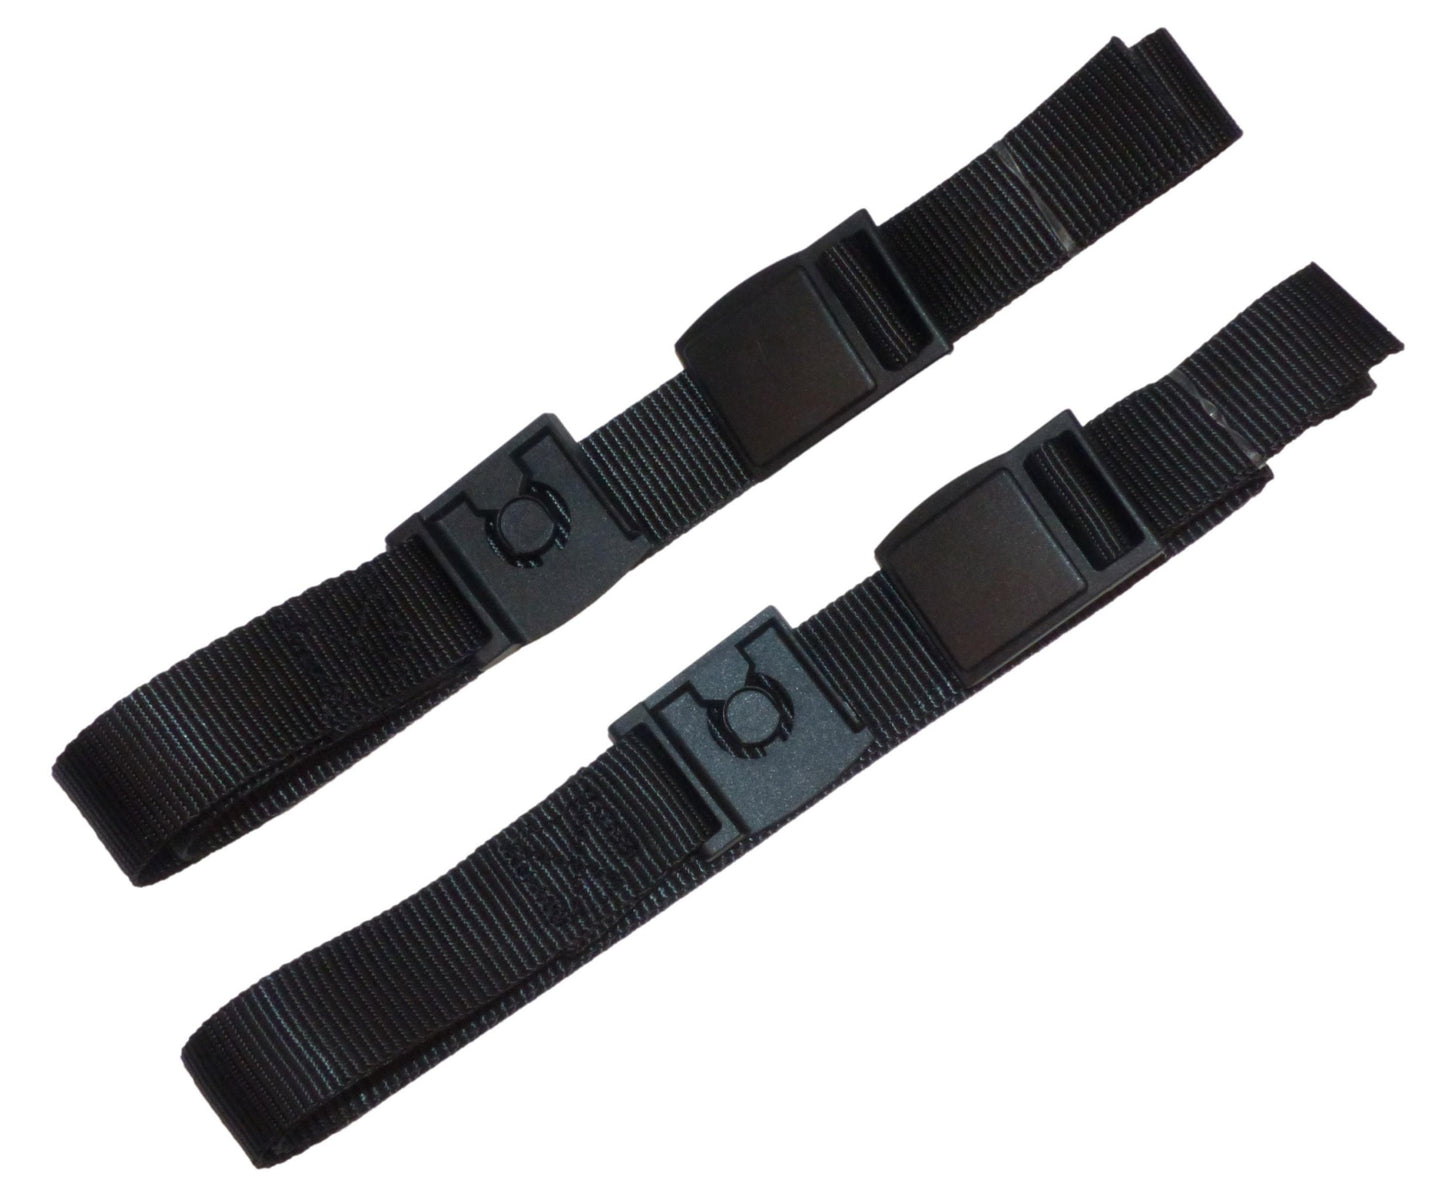 25mm Strap with Fidlock Quick Release Buckle (Pair) in black